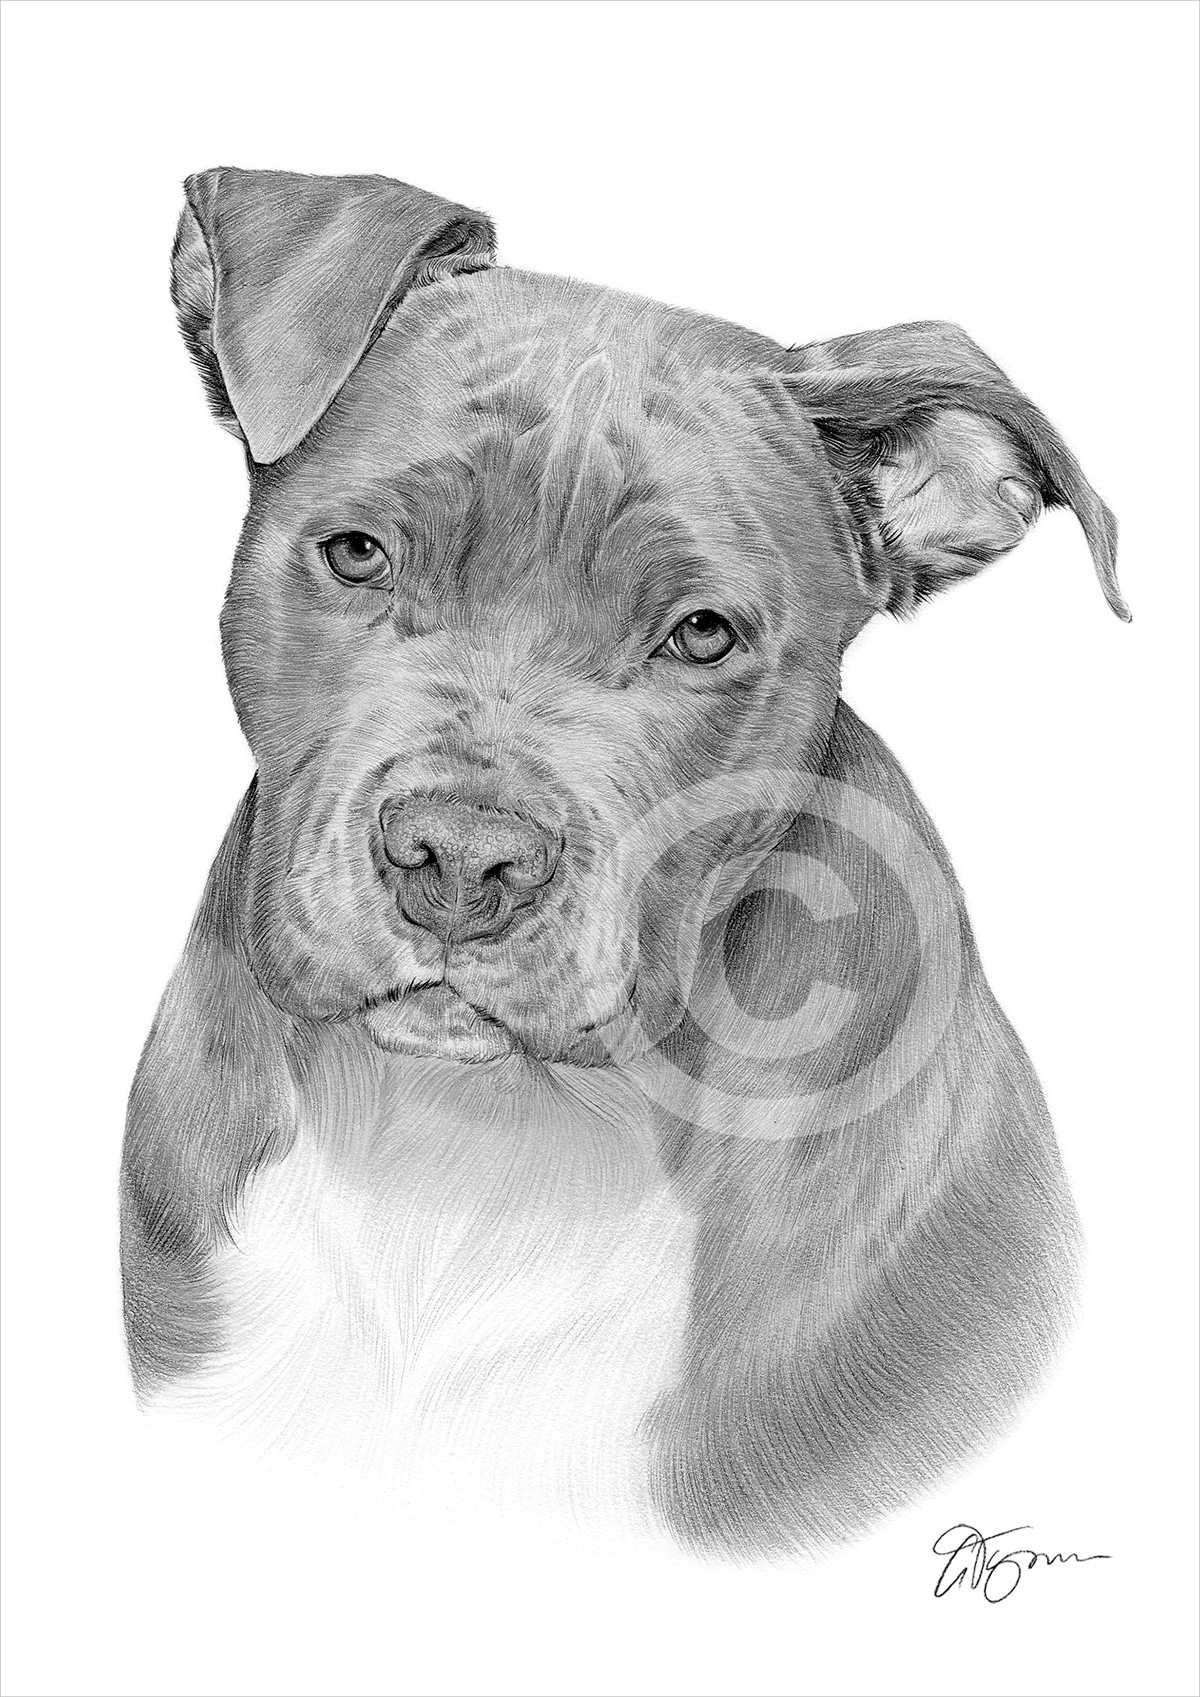 American PIT BULL TERRIER dog artwork print A3/A4 signed pencil drawing